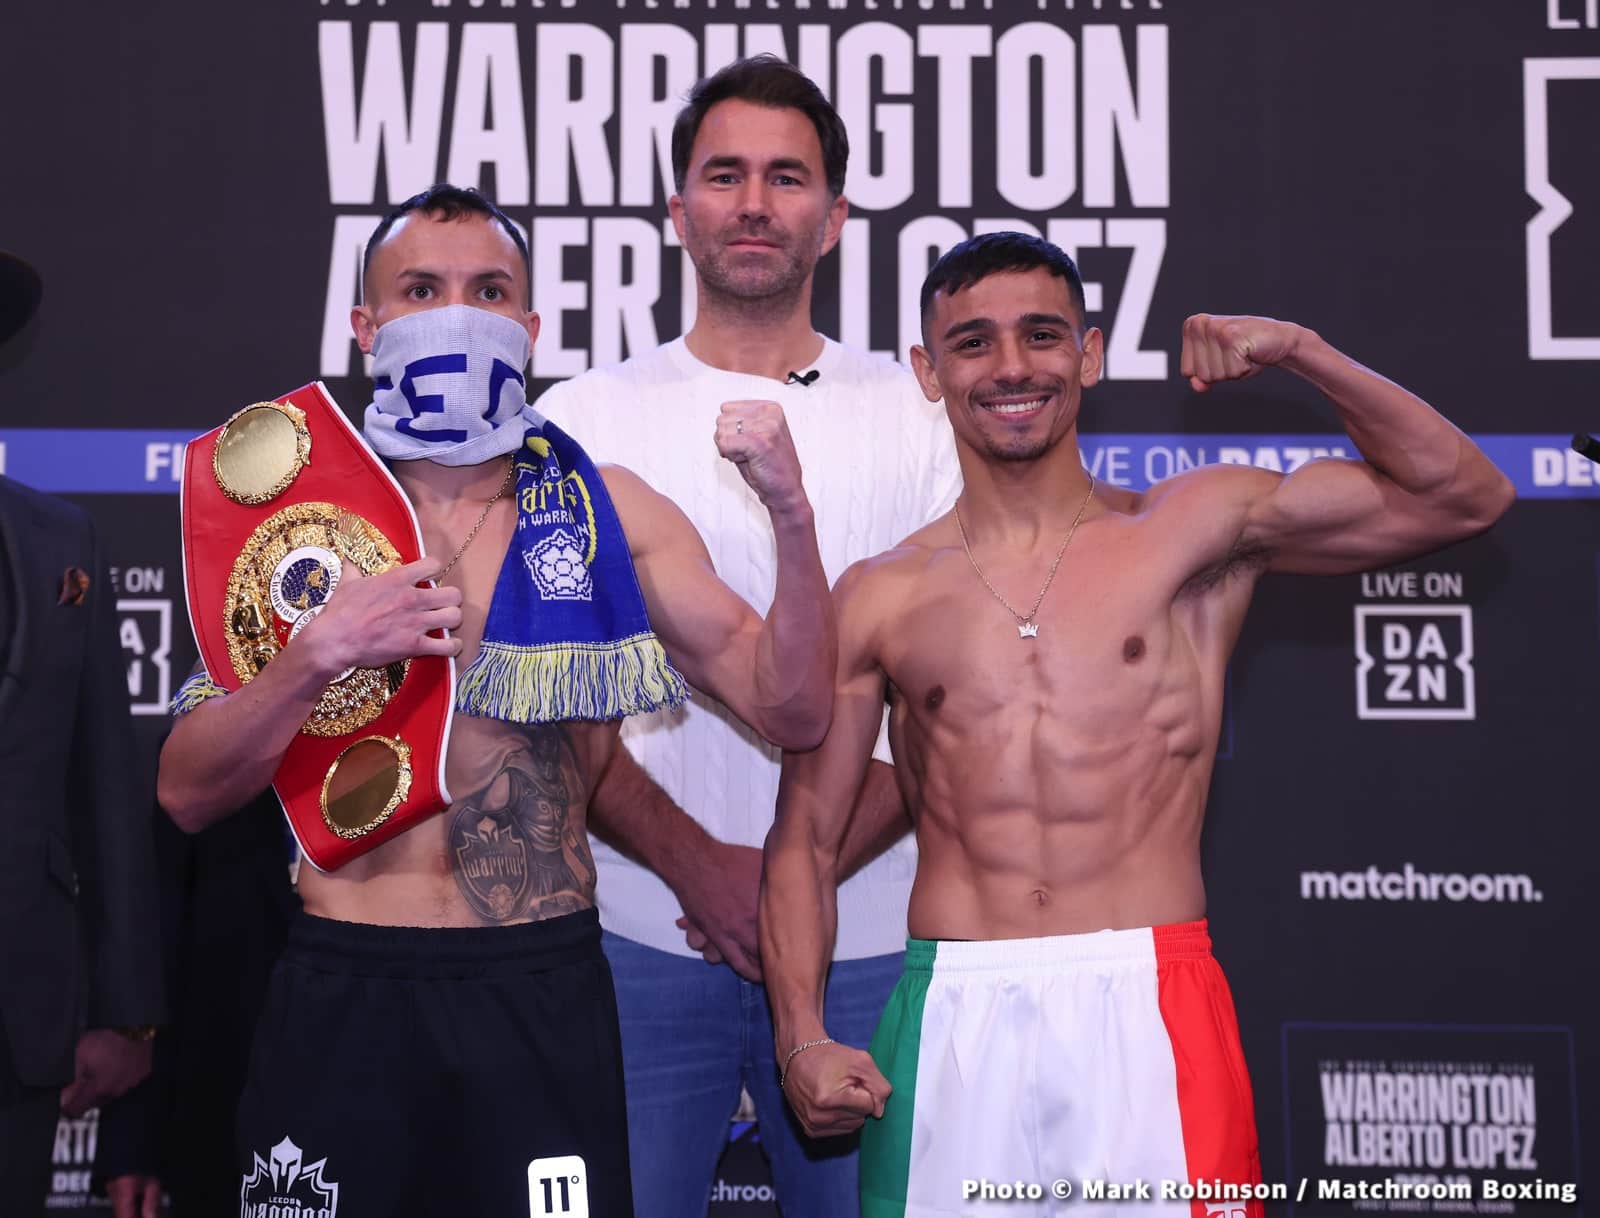 Image: Warrington 125 1/4 vs. Lopez 124 1/4 - weigh-in results